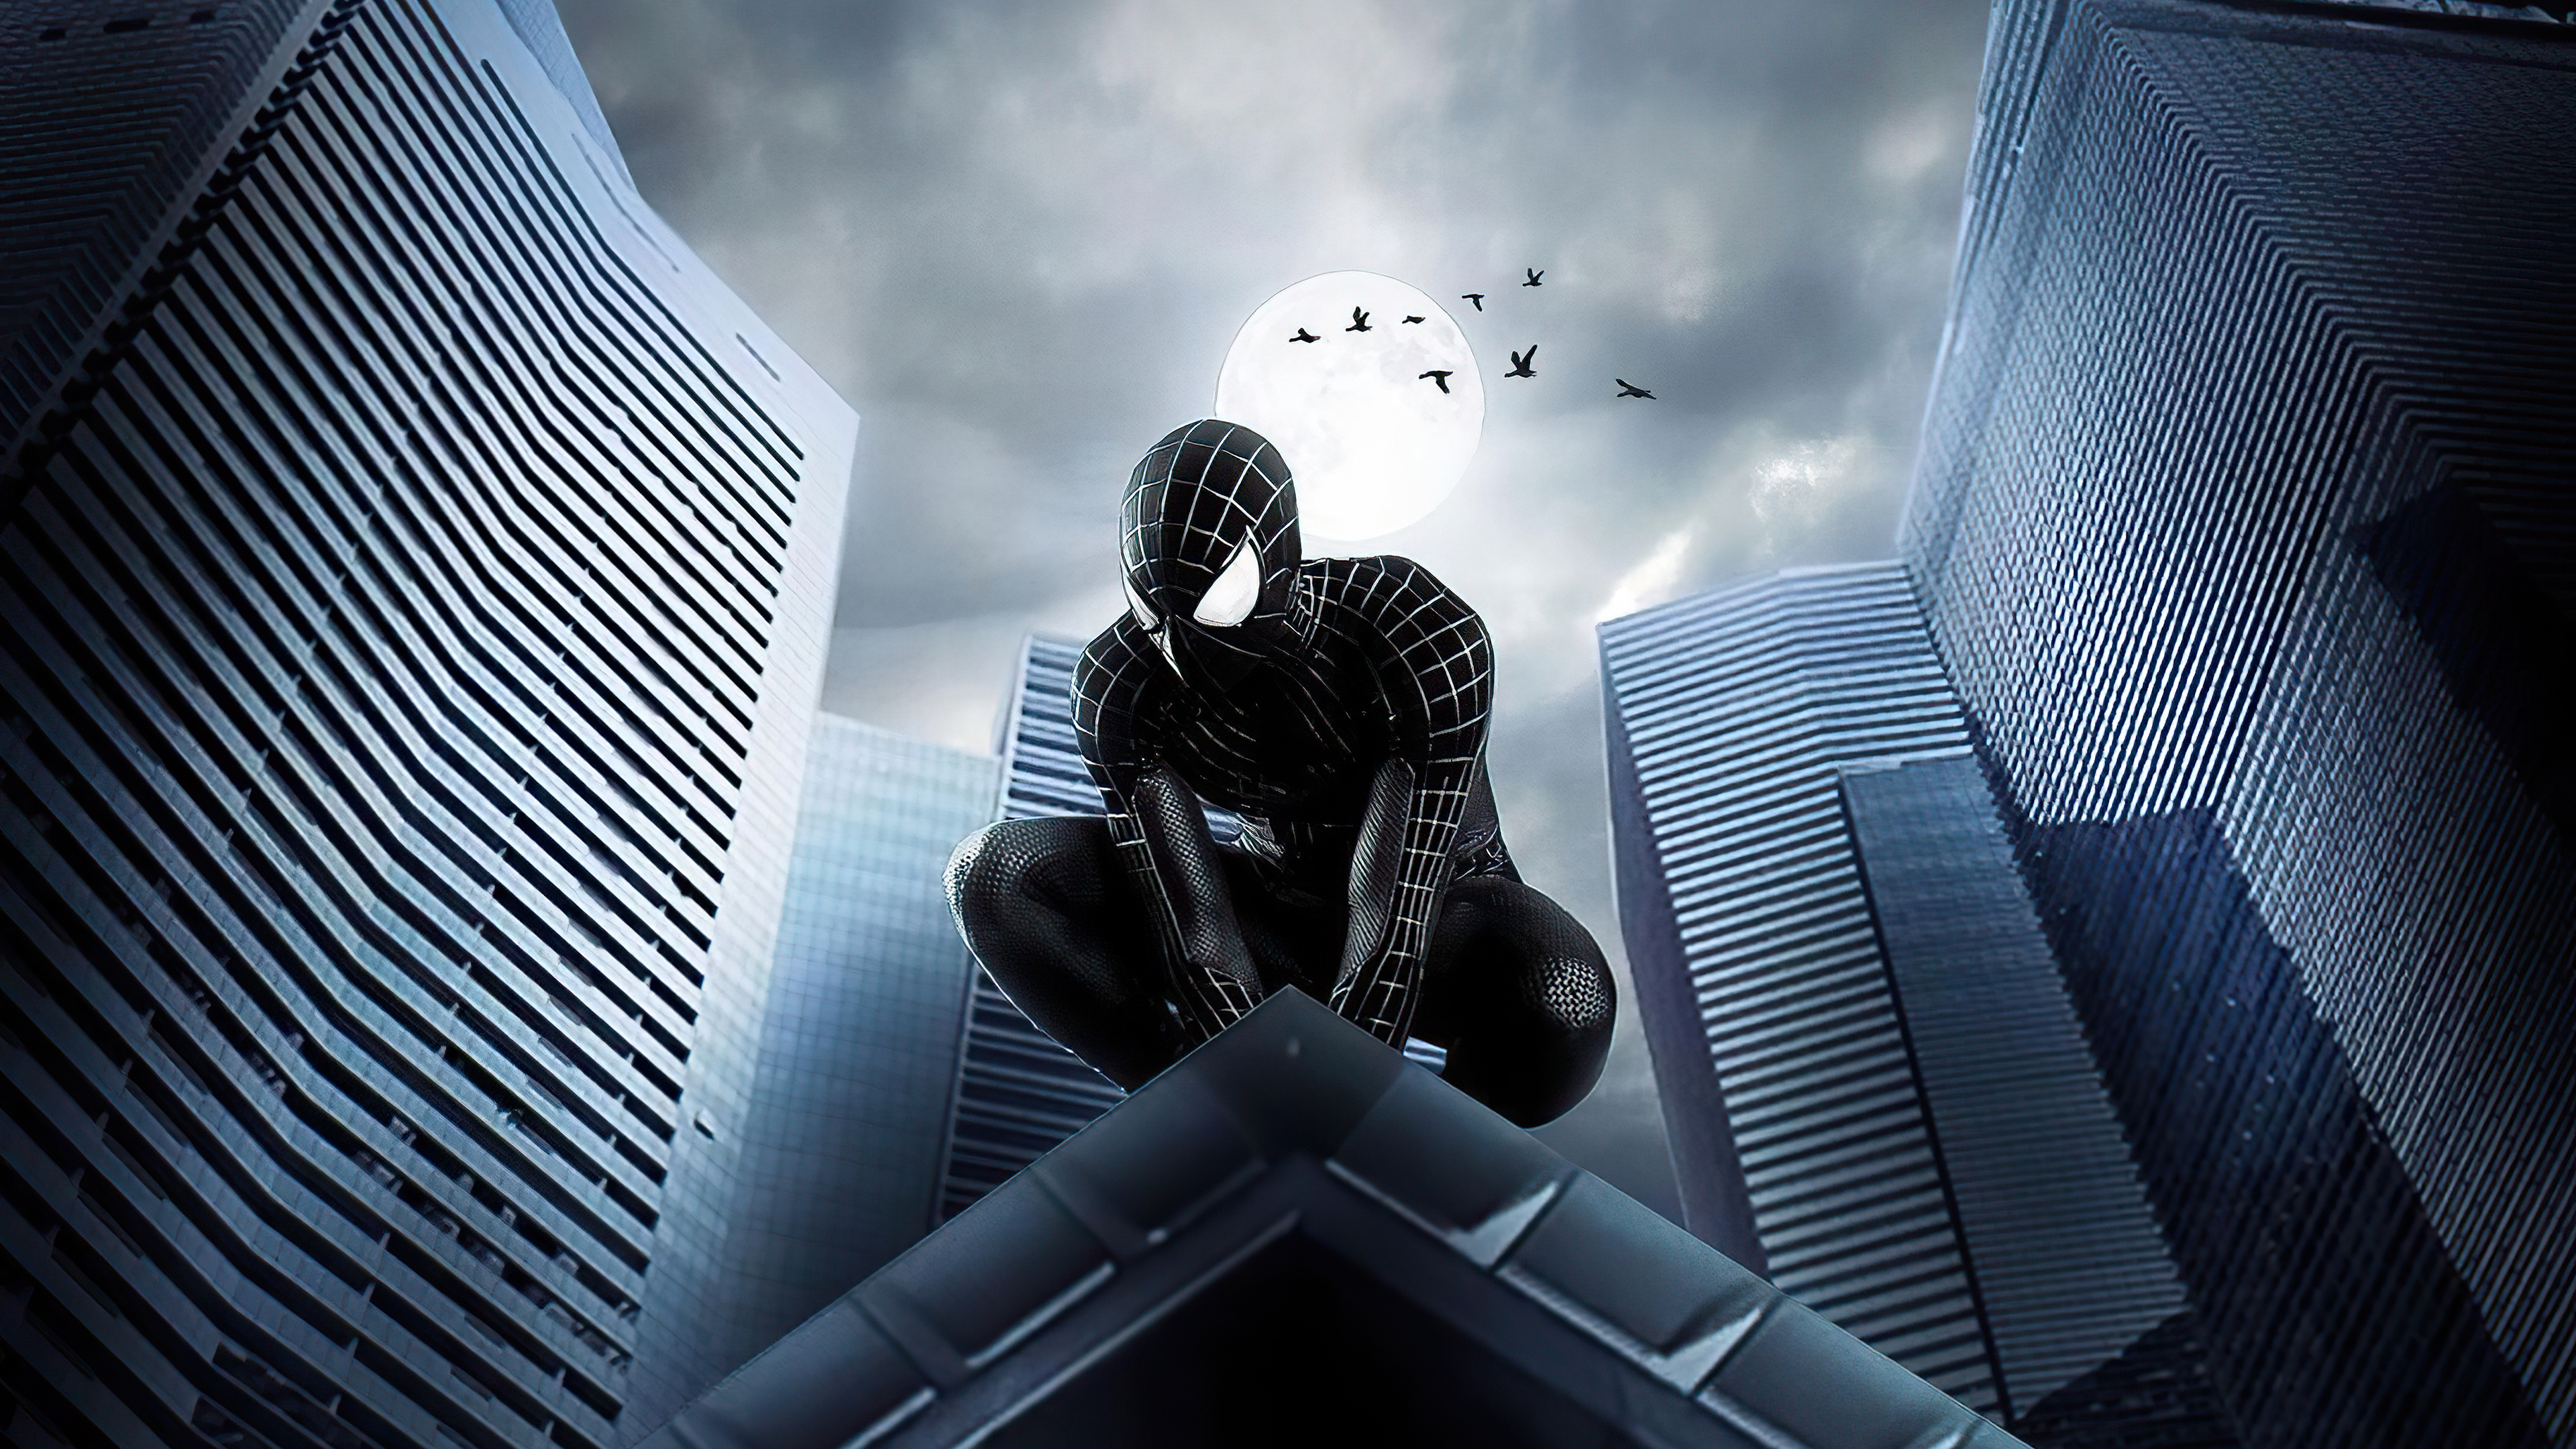 Spider Man Dark Knight Wallpaper, HD Superheroes 4K Wallpapers, Images,  Photos and Background - Wallpapers Den